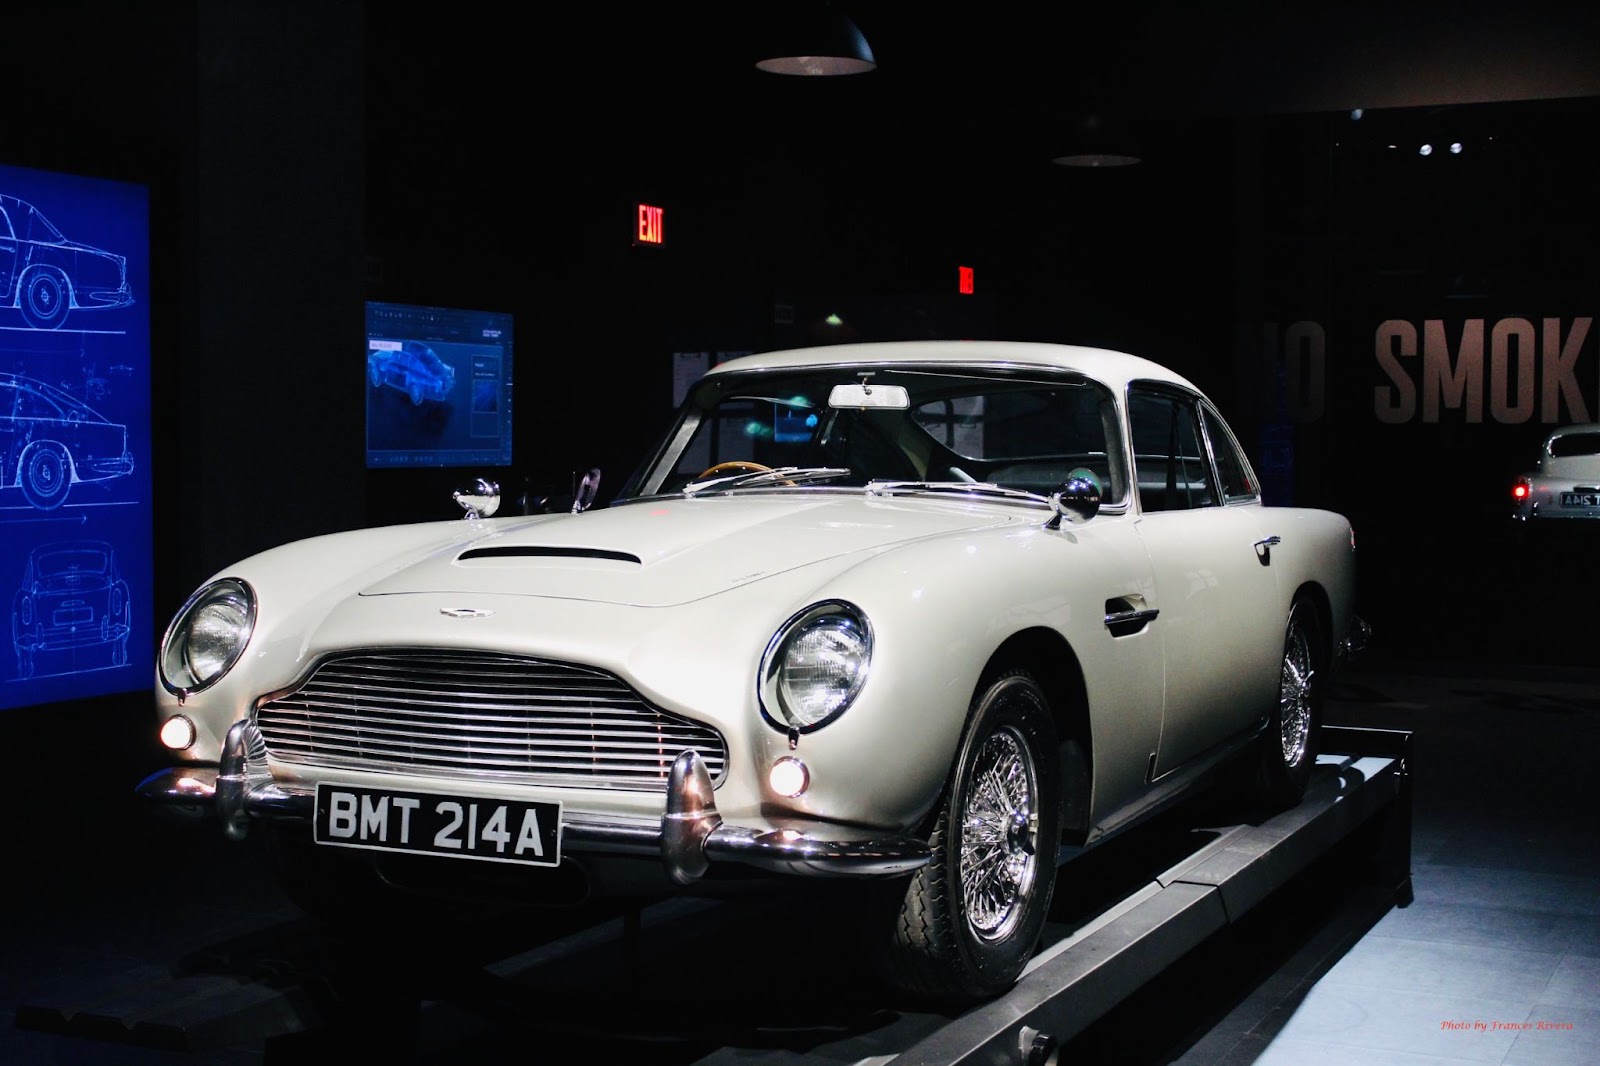 The DB5 from GoldenEye at SPYSCAPE's New York HQ